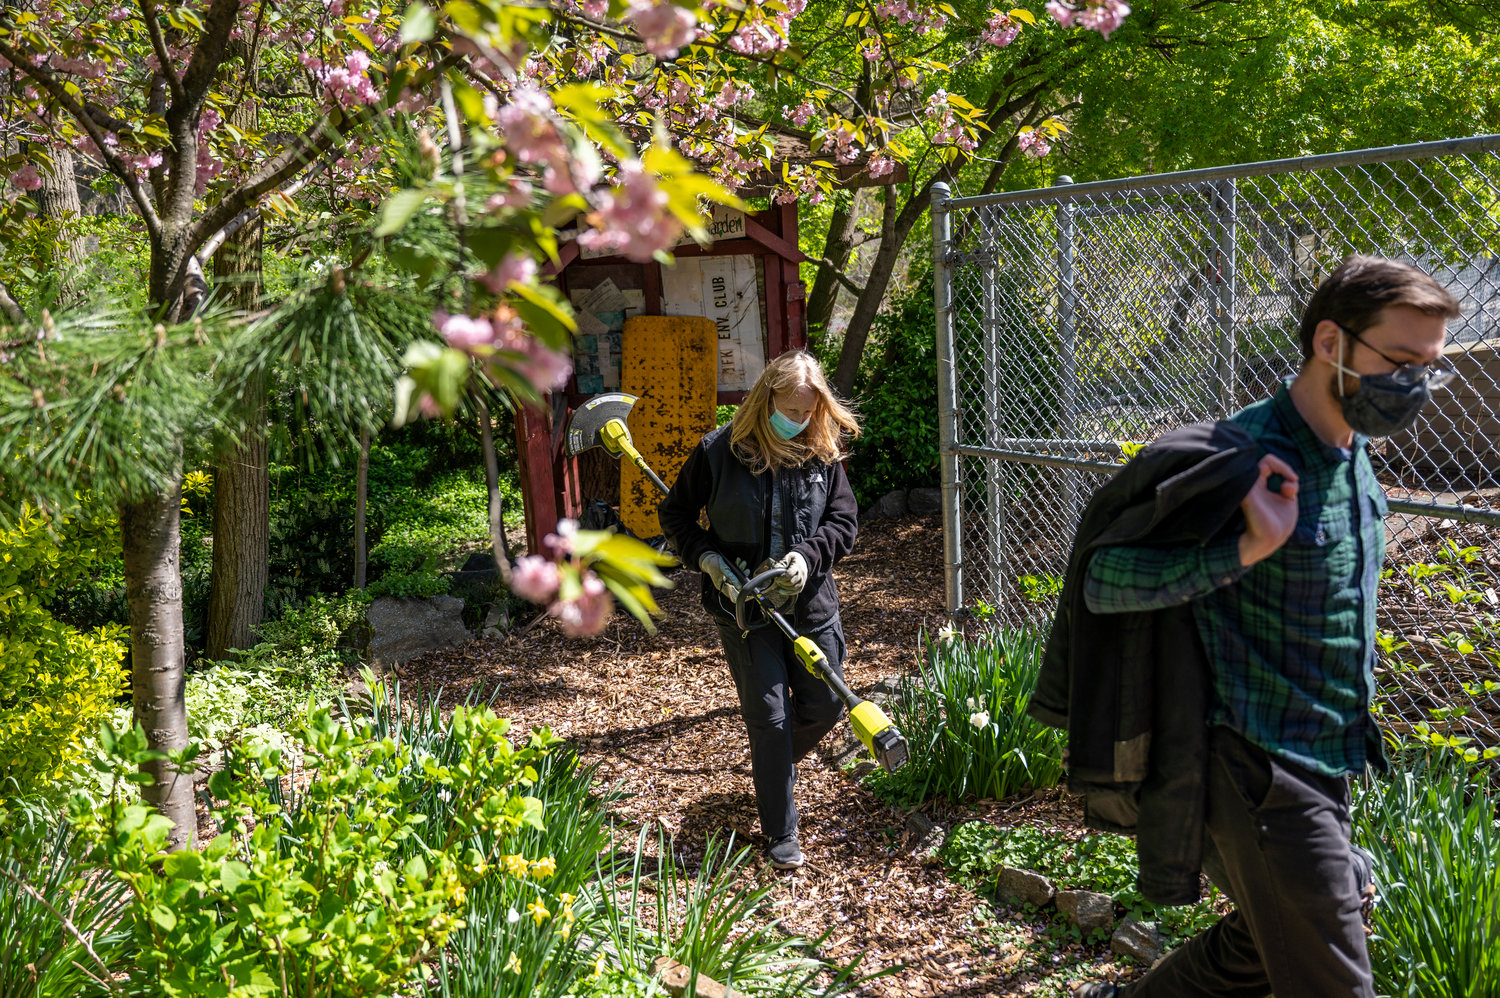 Several items were stolen from the Enchanted Garden on the John F. Kennedy Educational Campus earlier this month. But thankfully, one of the weed whackers wasn’t stolen, allowing Susan O’ahilly to carry on with business as usual.